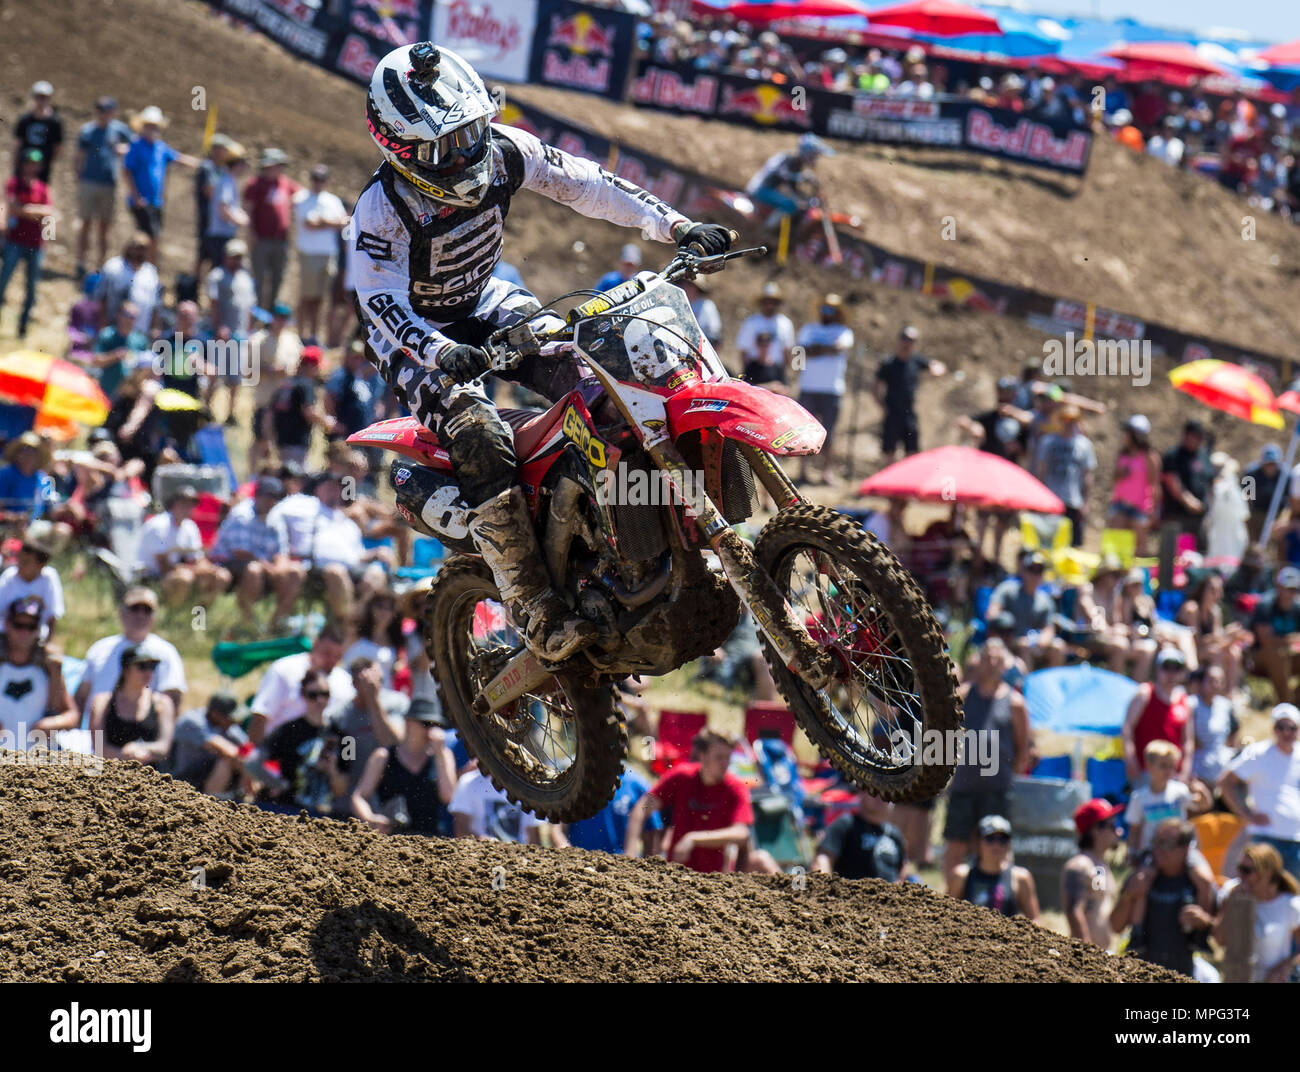 Rancho Cordova, CA. 19th May, 2018. # 6 Jeremy Martin gave Osborne a fight  for 1st place during the Lucas Oil Pro Motocross Championship 250cc class  moto # 1 at Hangtown Motocross